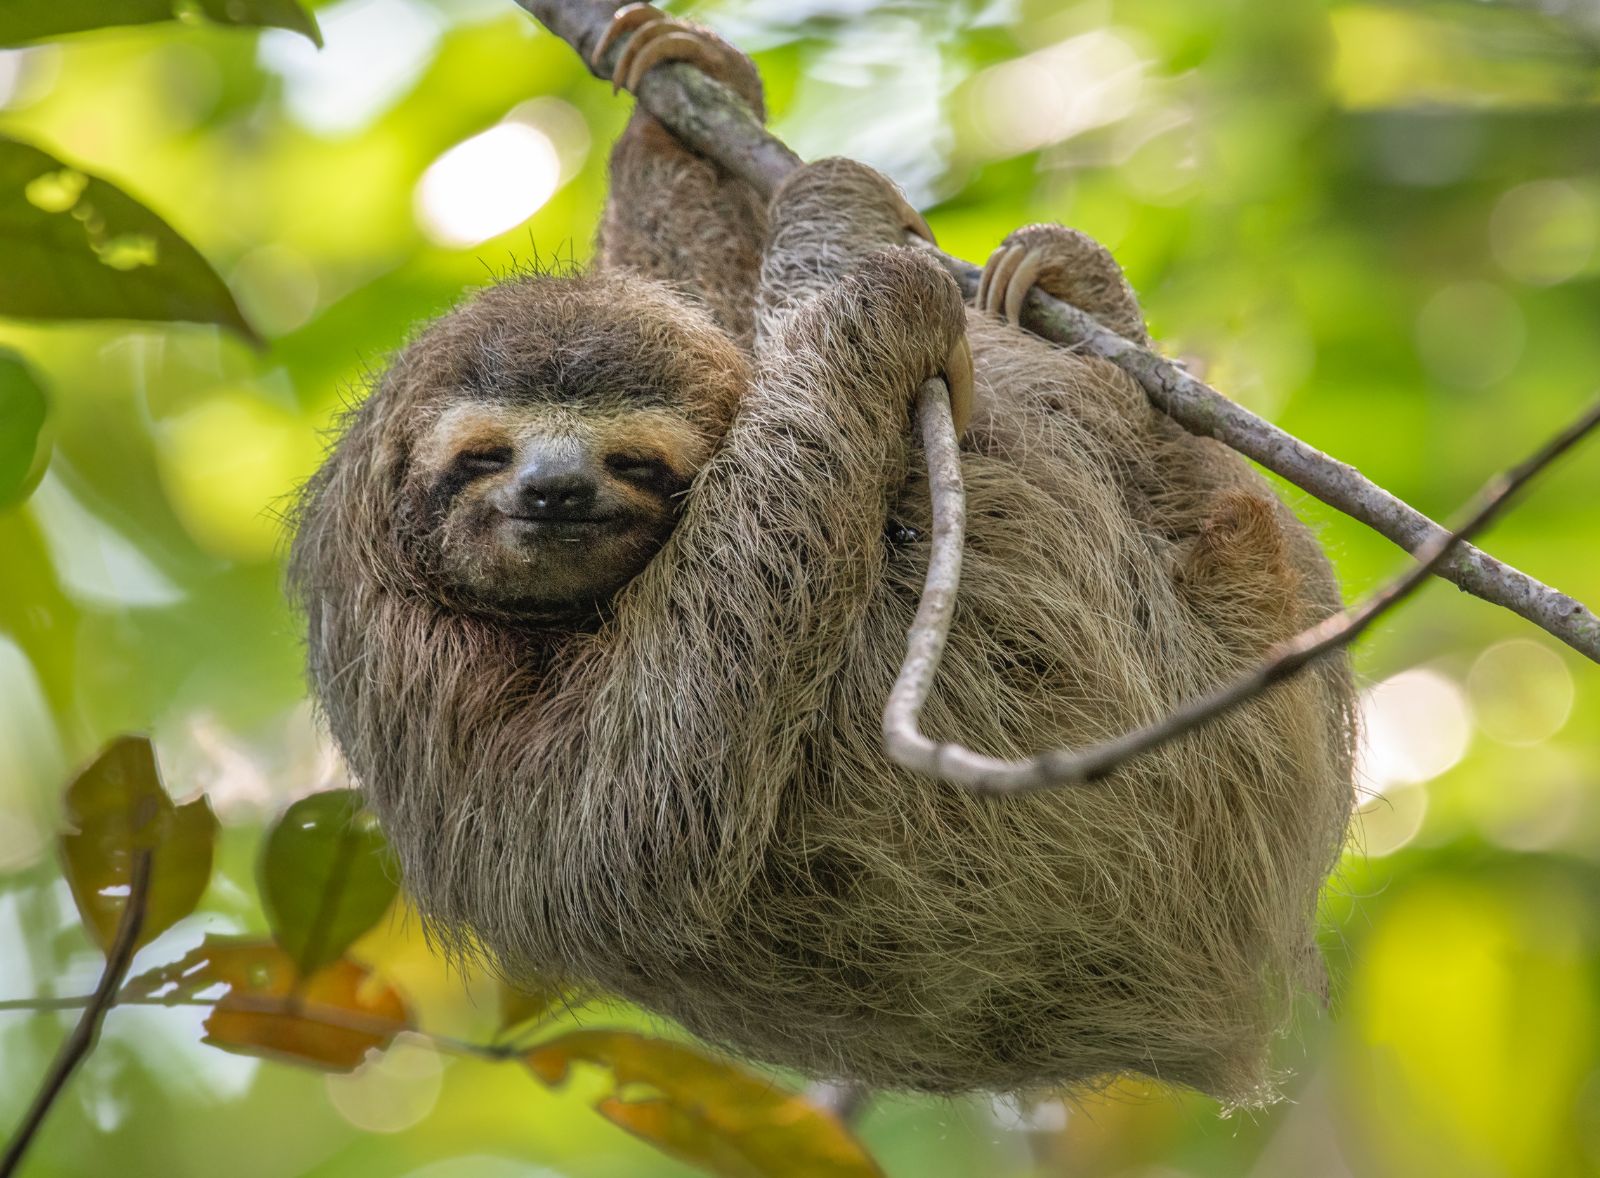 Three toed sloth hanging from a tree branch in Costa Rica